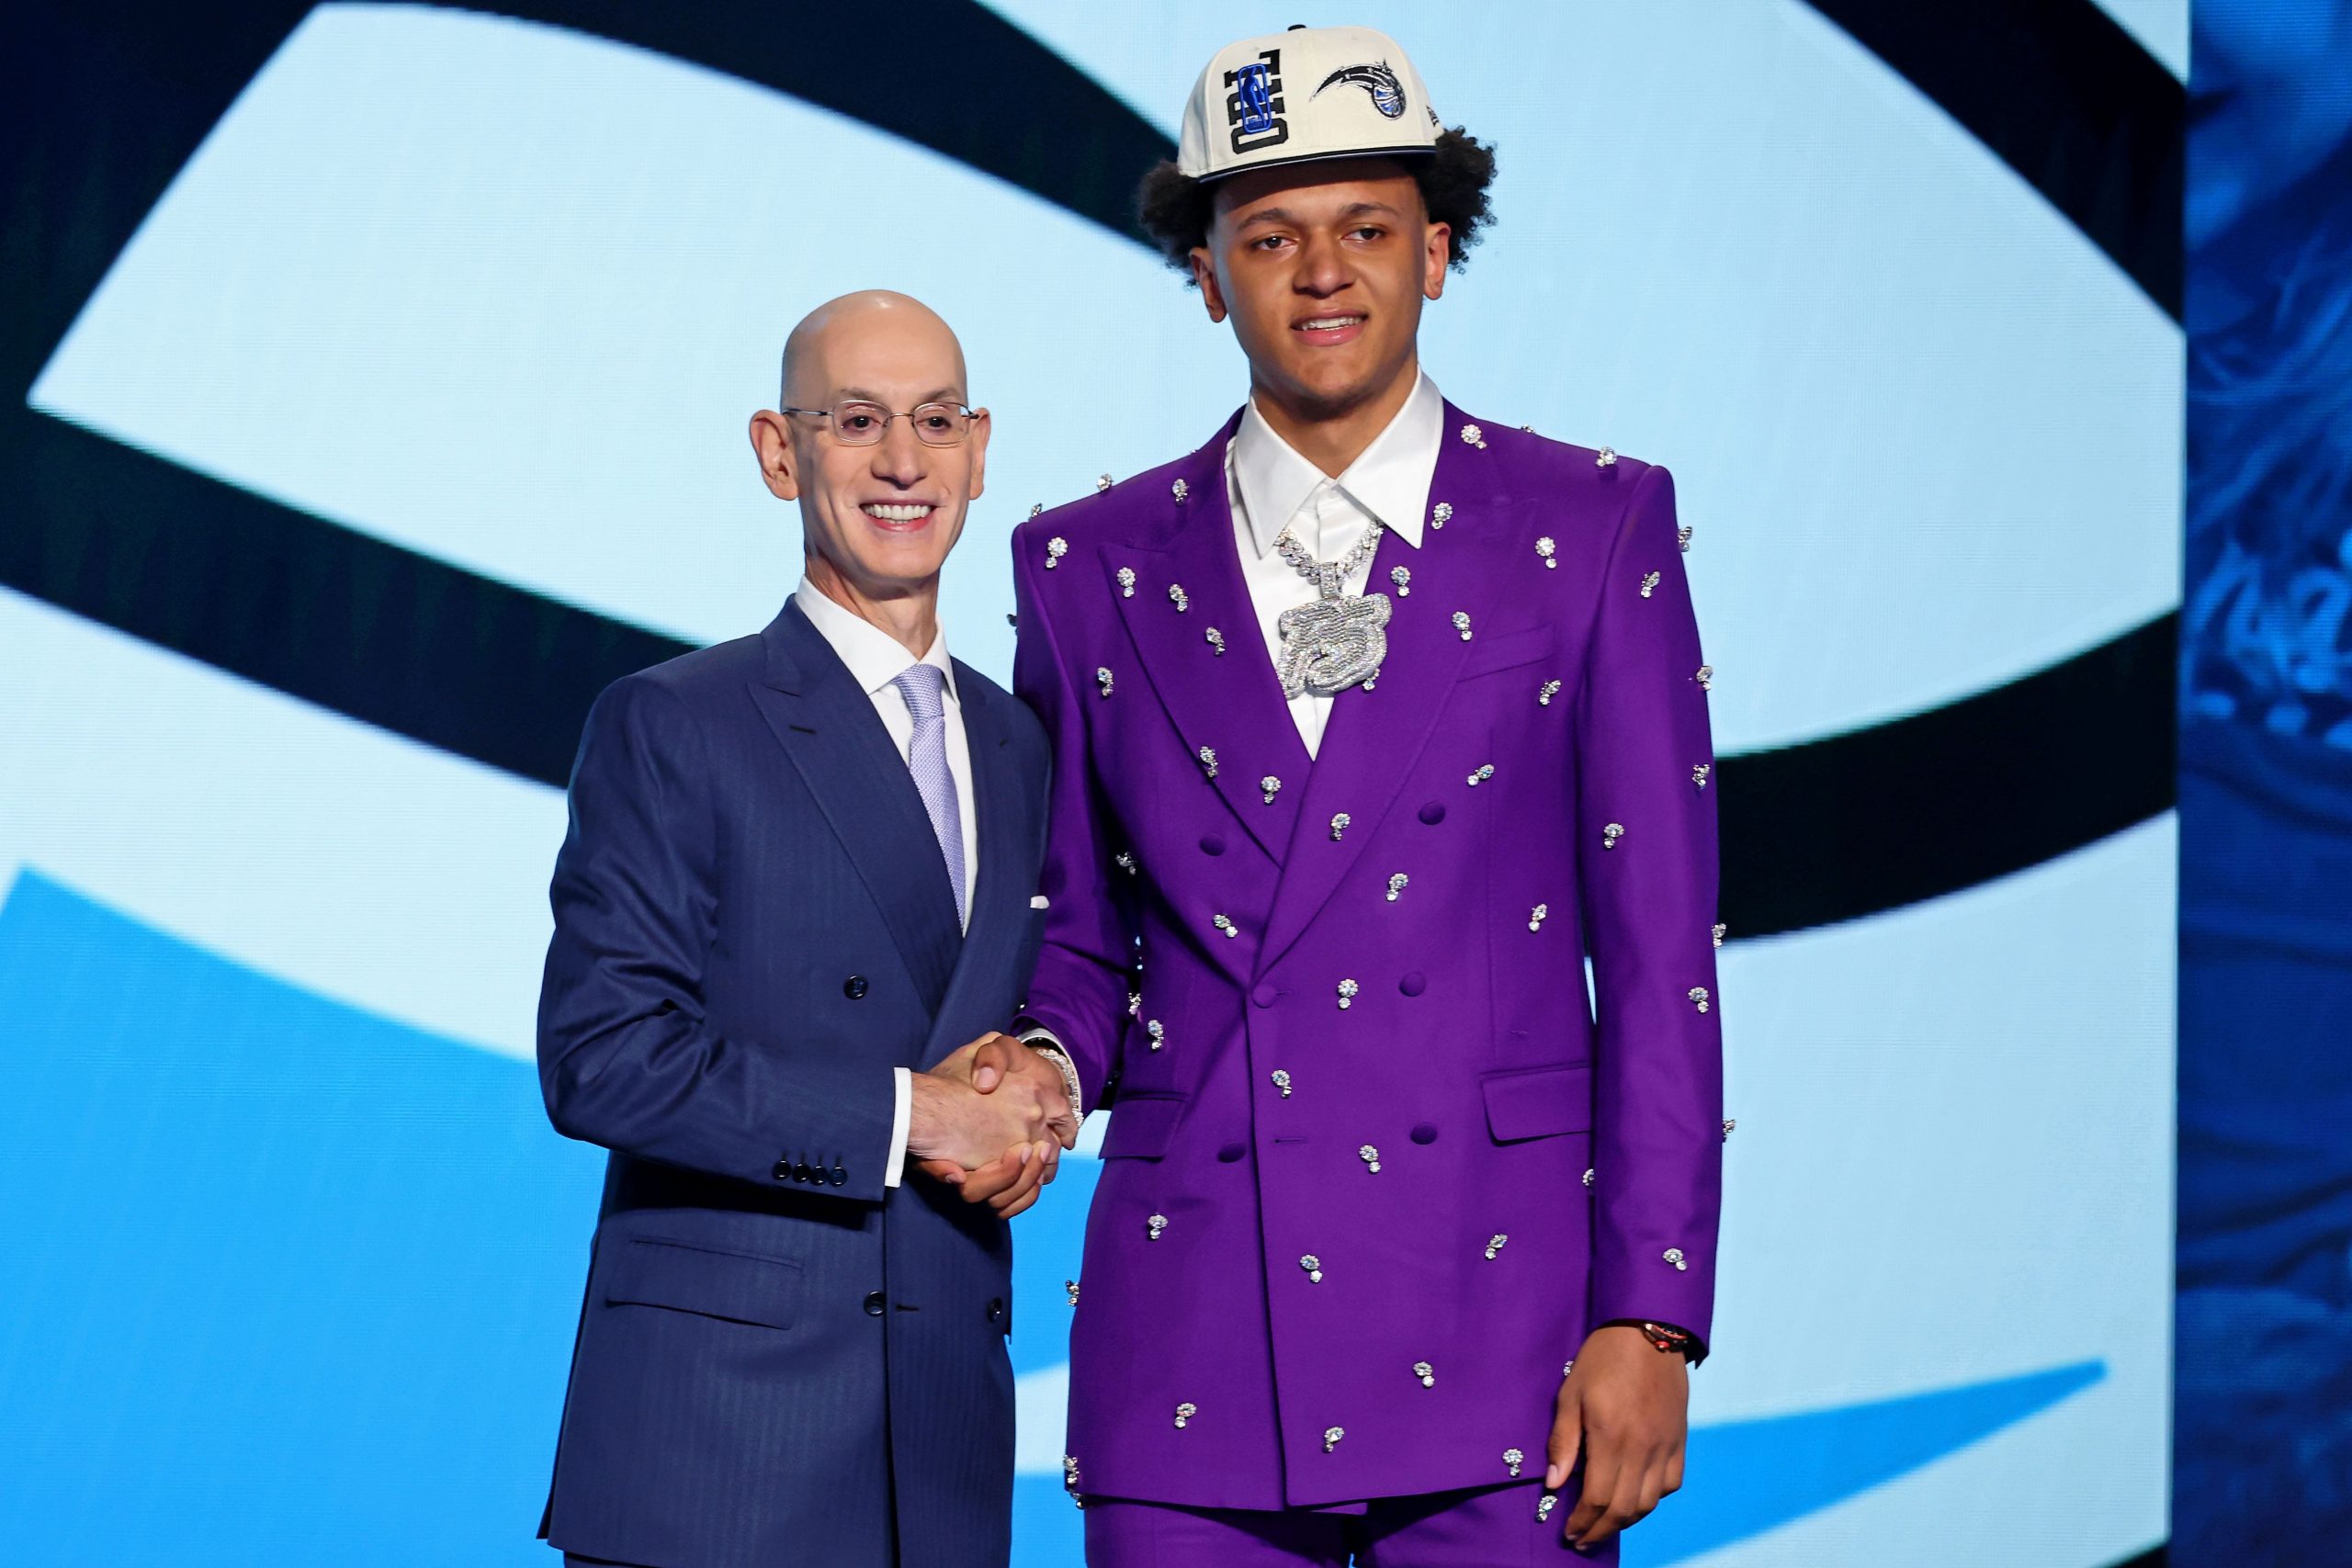 vPaolo Banchero (Duke) shakes hands with NBA commissioner Adam Silver after being selected as the number one overall pick by the Orlando Magic in the first round of the 2022 NBA Draft at Barclays Center.